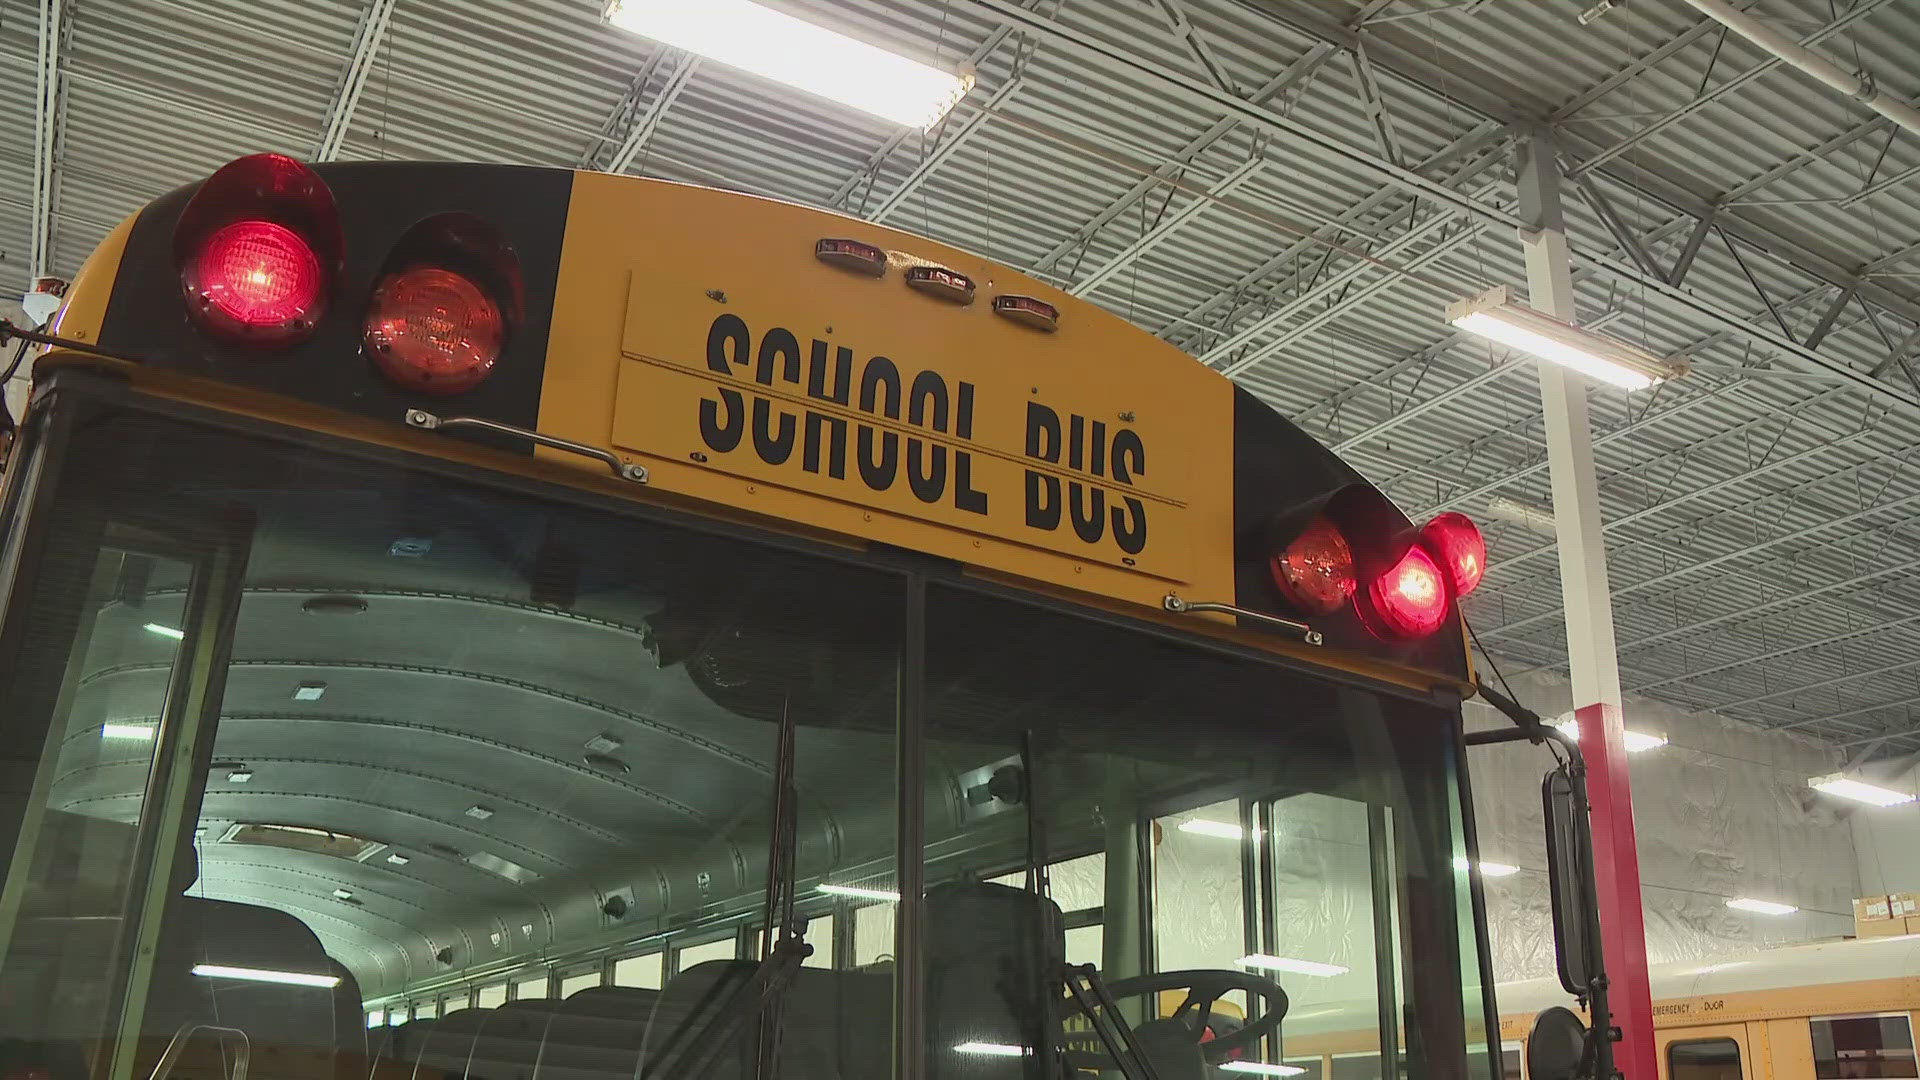 A new system is using AI cameras to catch drivers running the school bus stop arm, and keeping kids safe inside the buses as well.